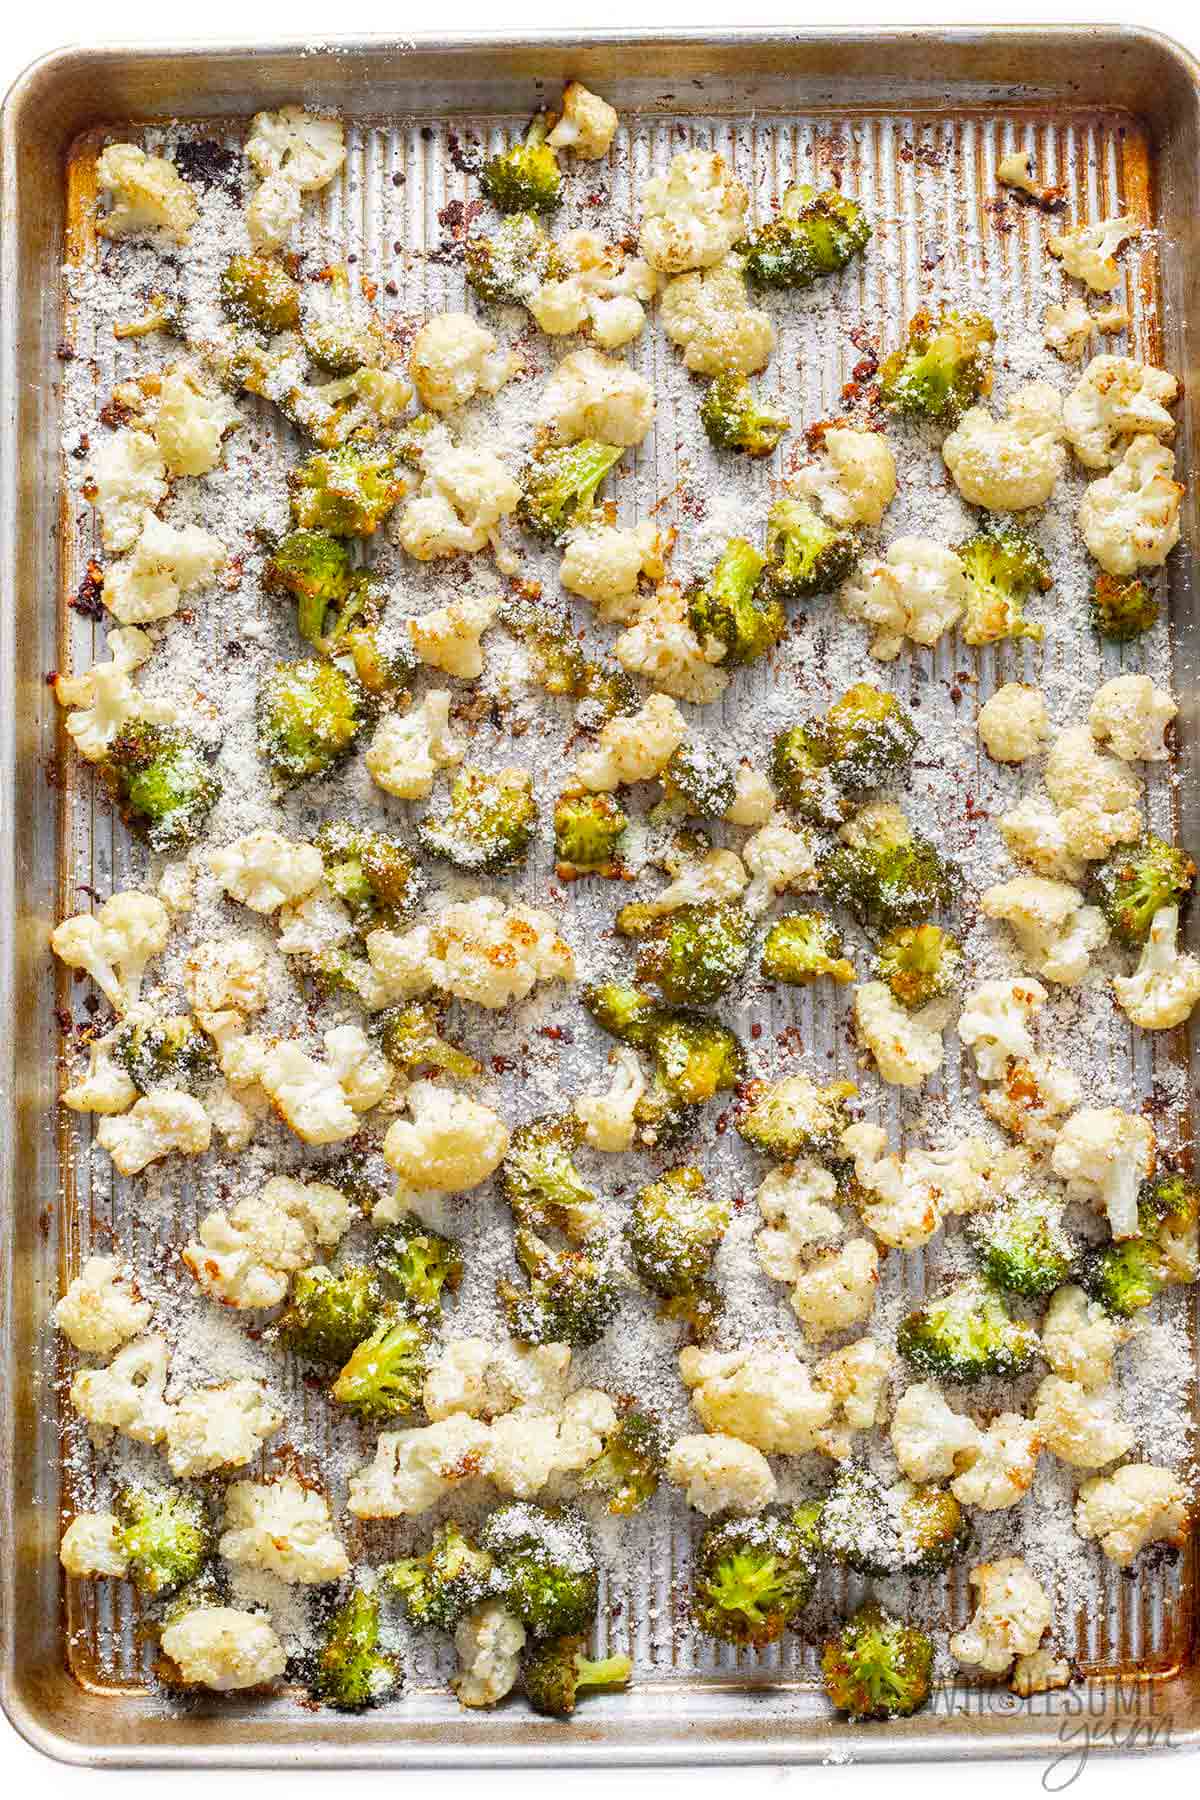 Roasted cauliflower and broccoli with parmesan cheese.